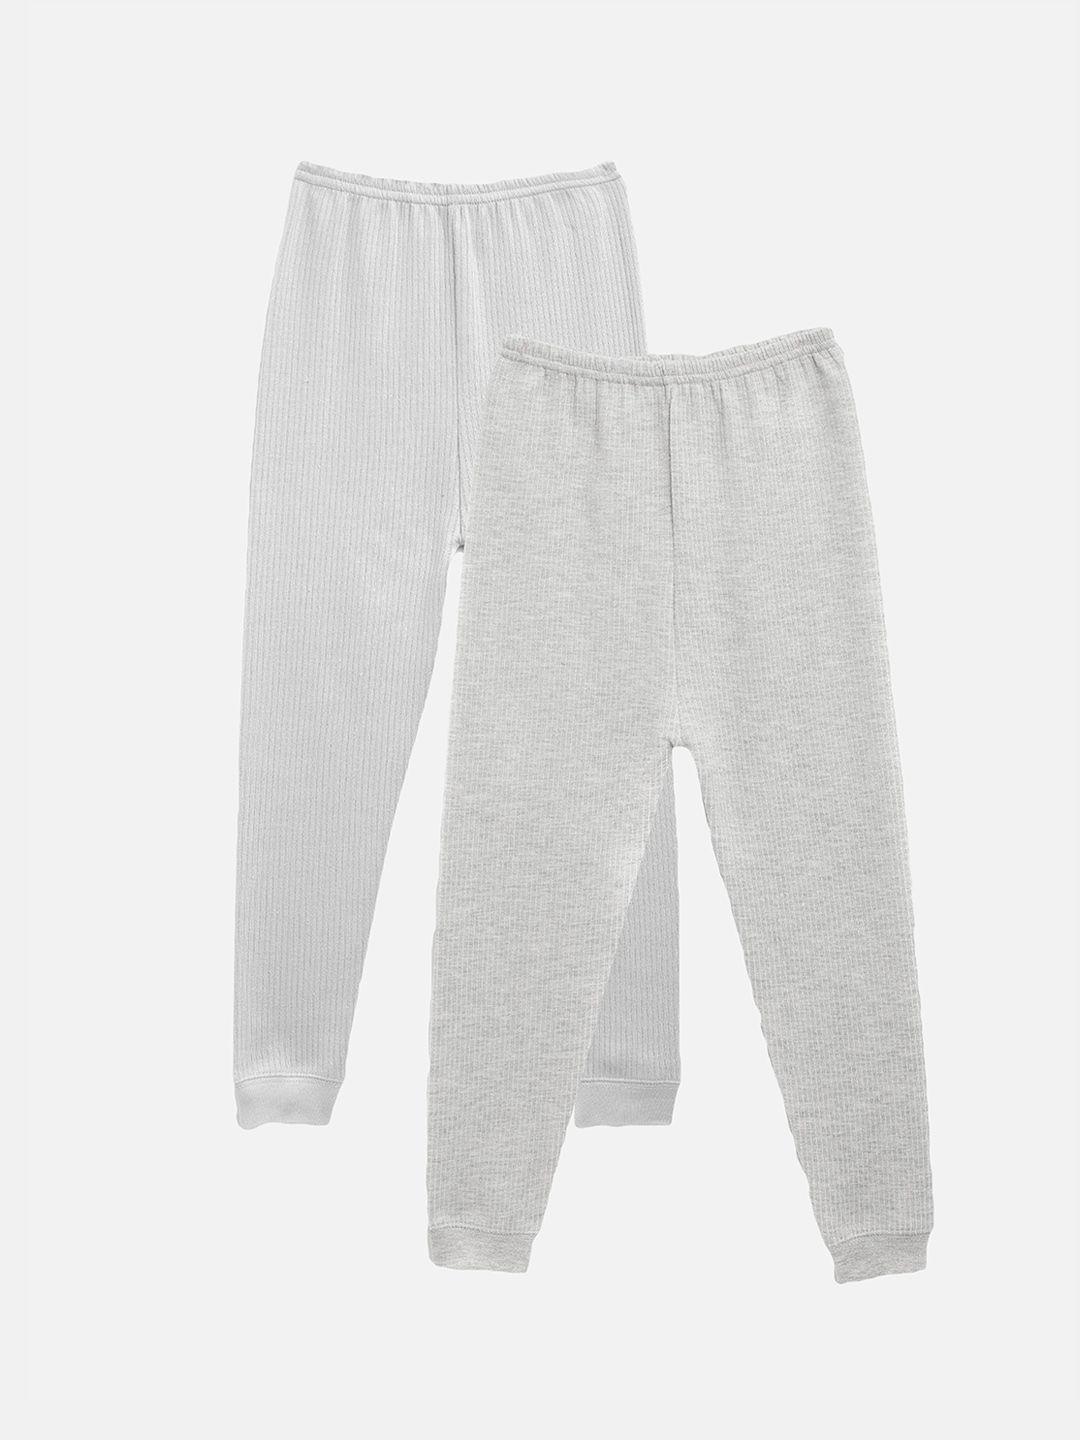 kanvin boys pack of 2 grey solid thermal bottoms